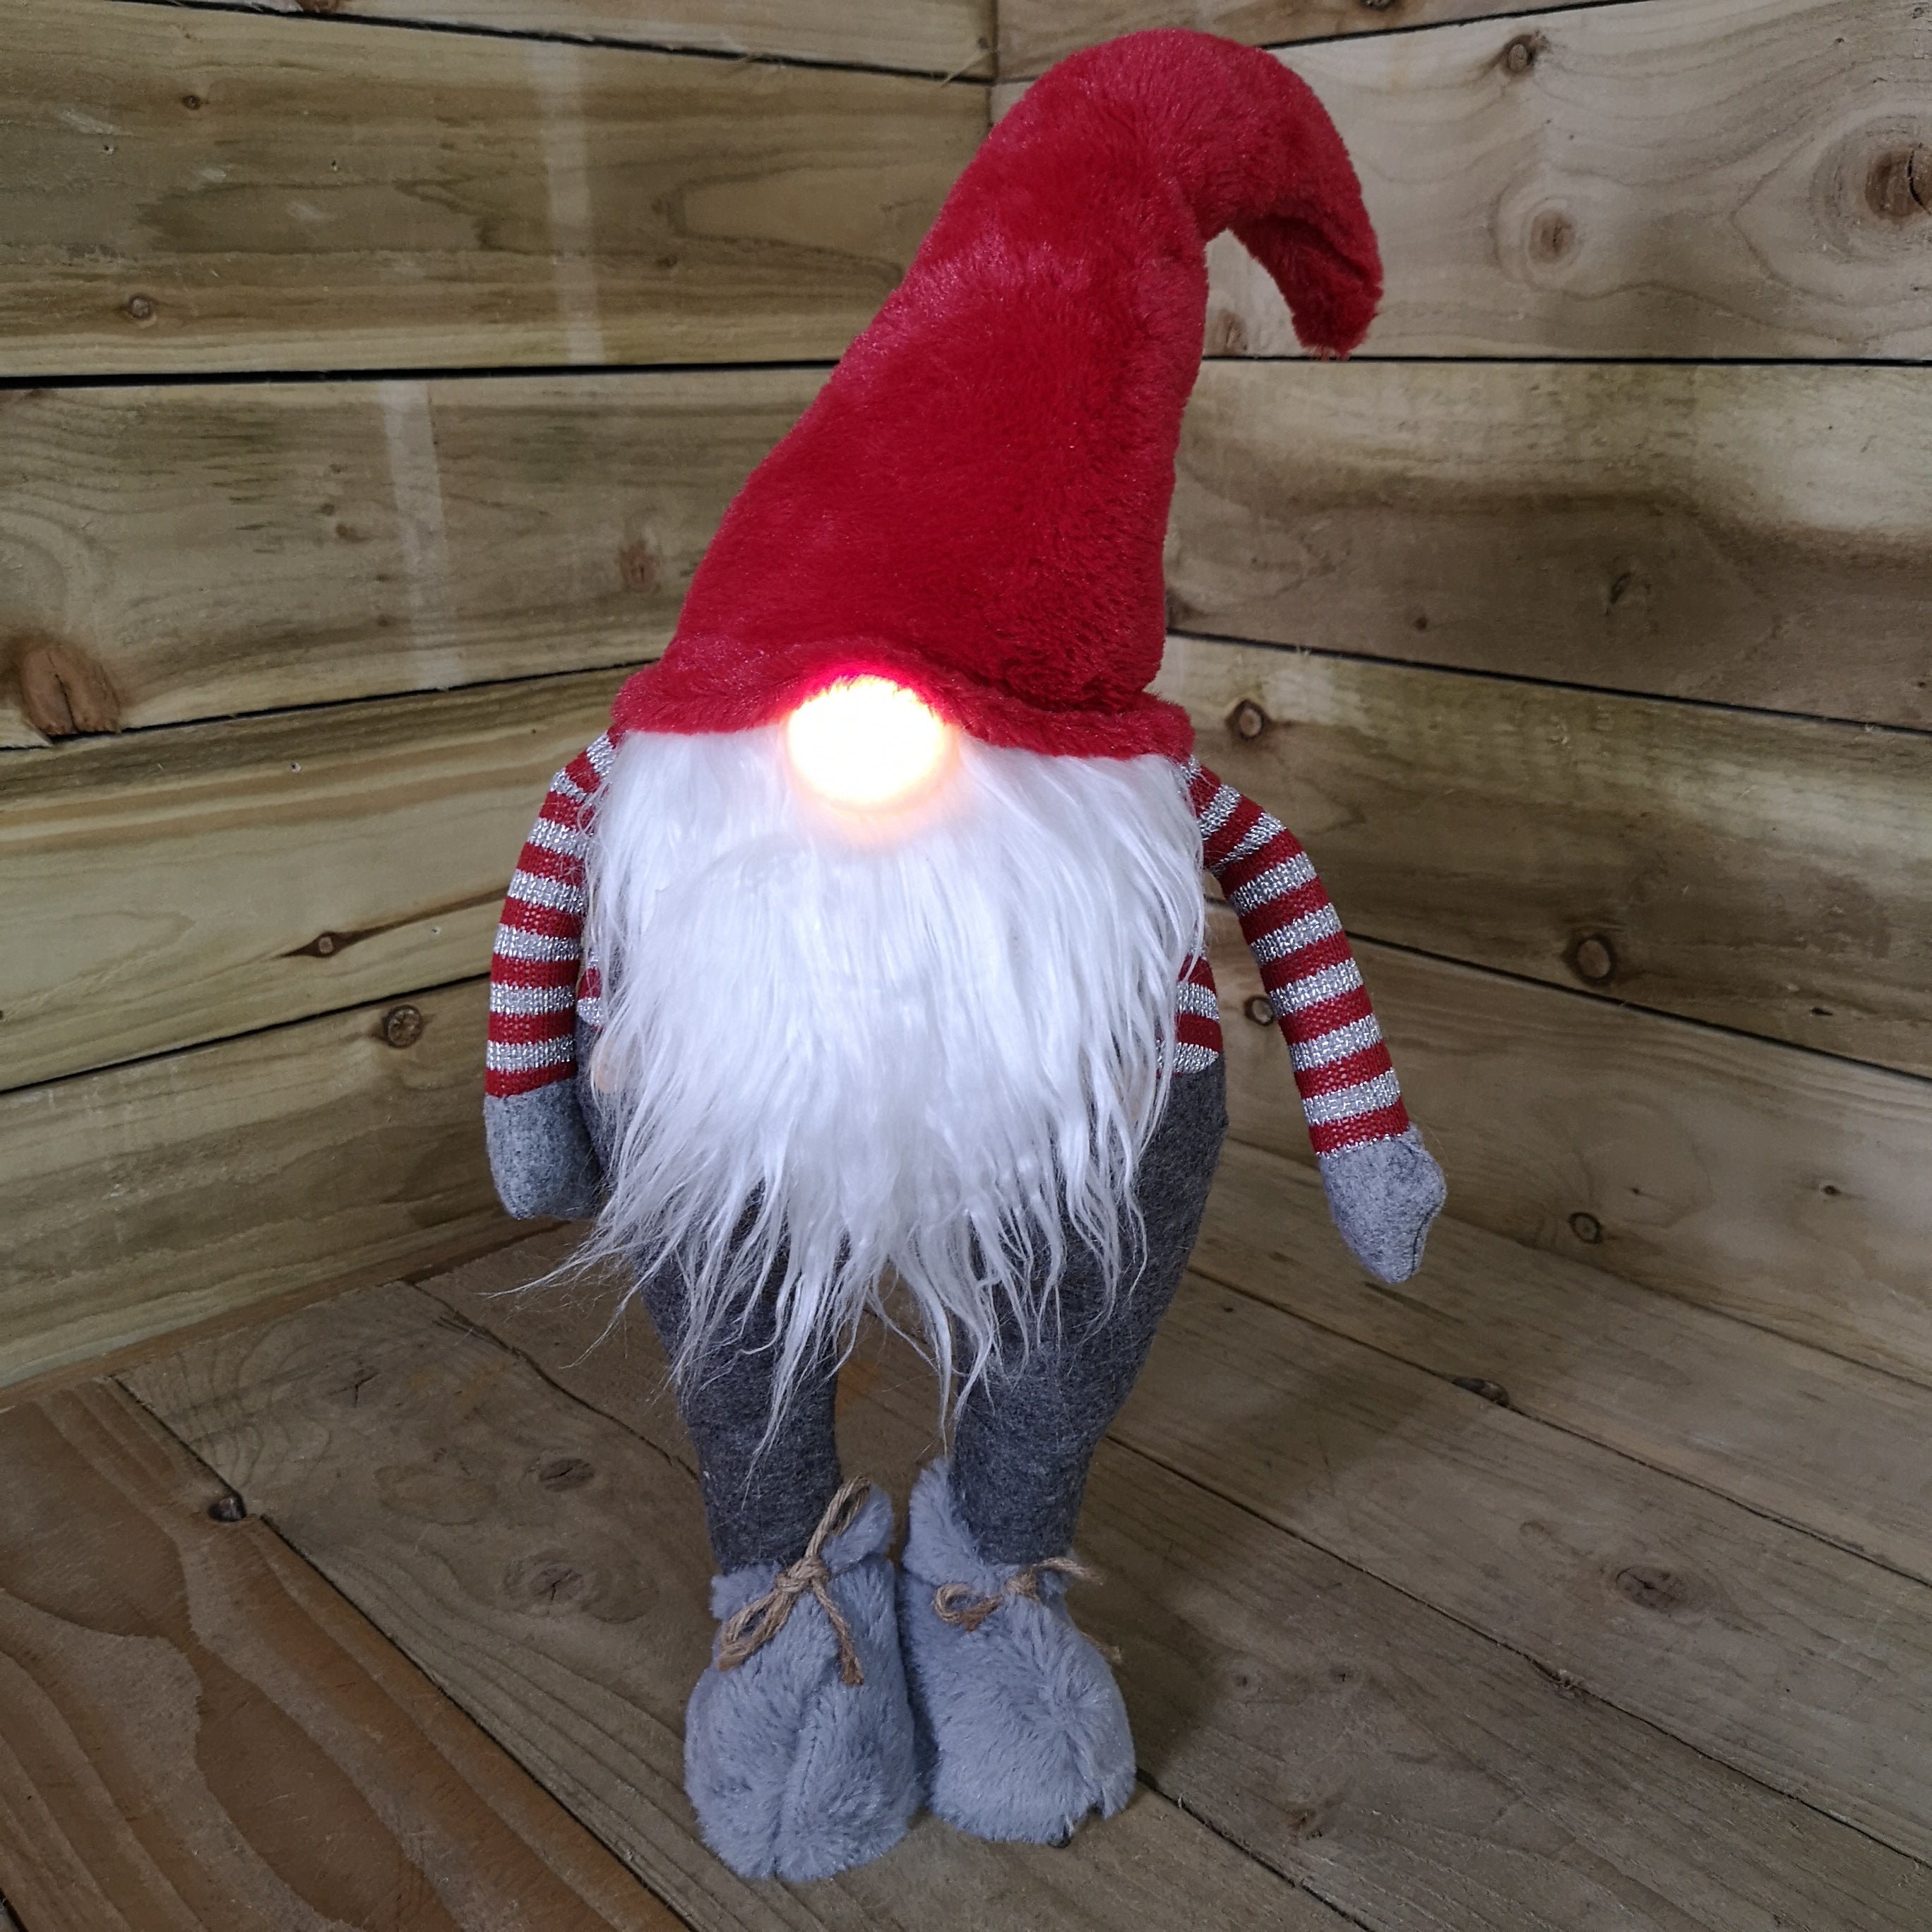 72cm Festive Christmas Light Up Lit Standing Red and Grey Christmas Gonk